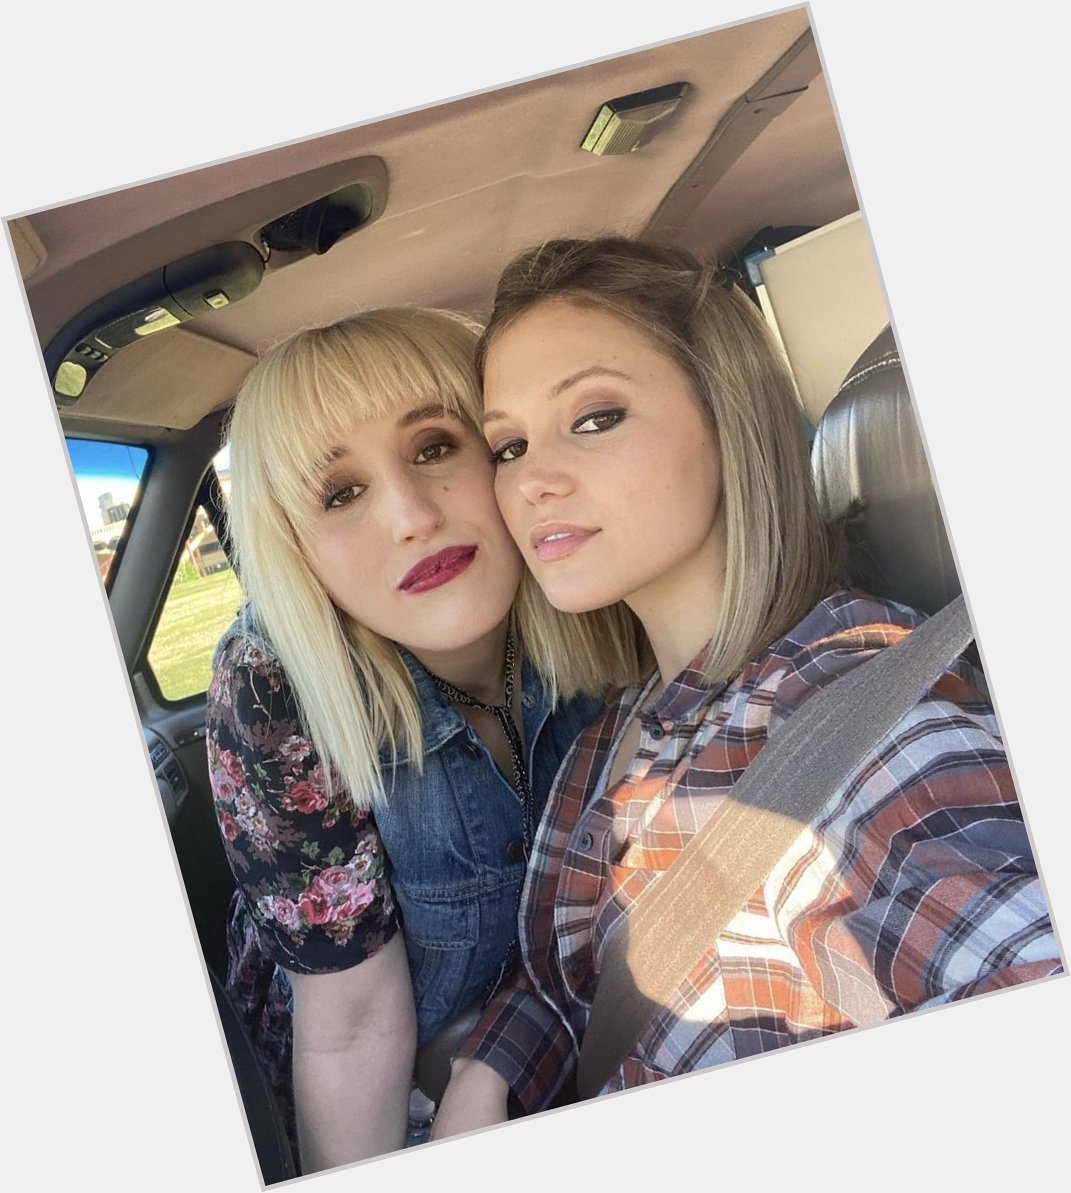 Happy birthday to Olivia s friend and co-star, Harley Quinn Smith! 